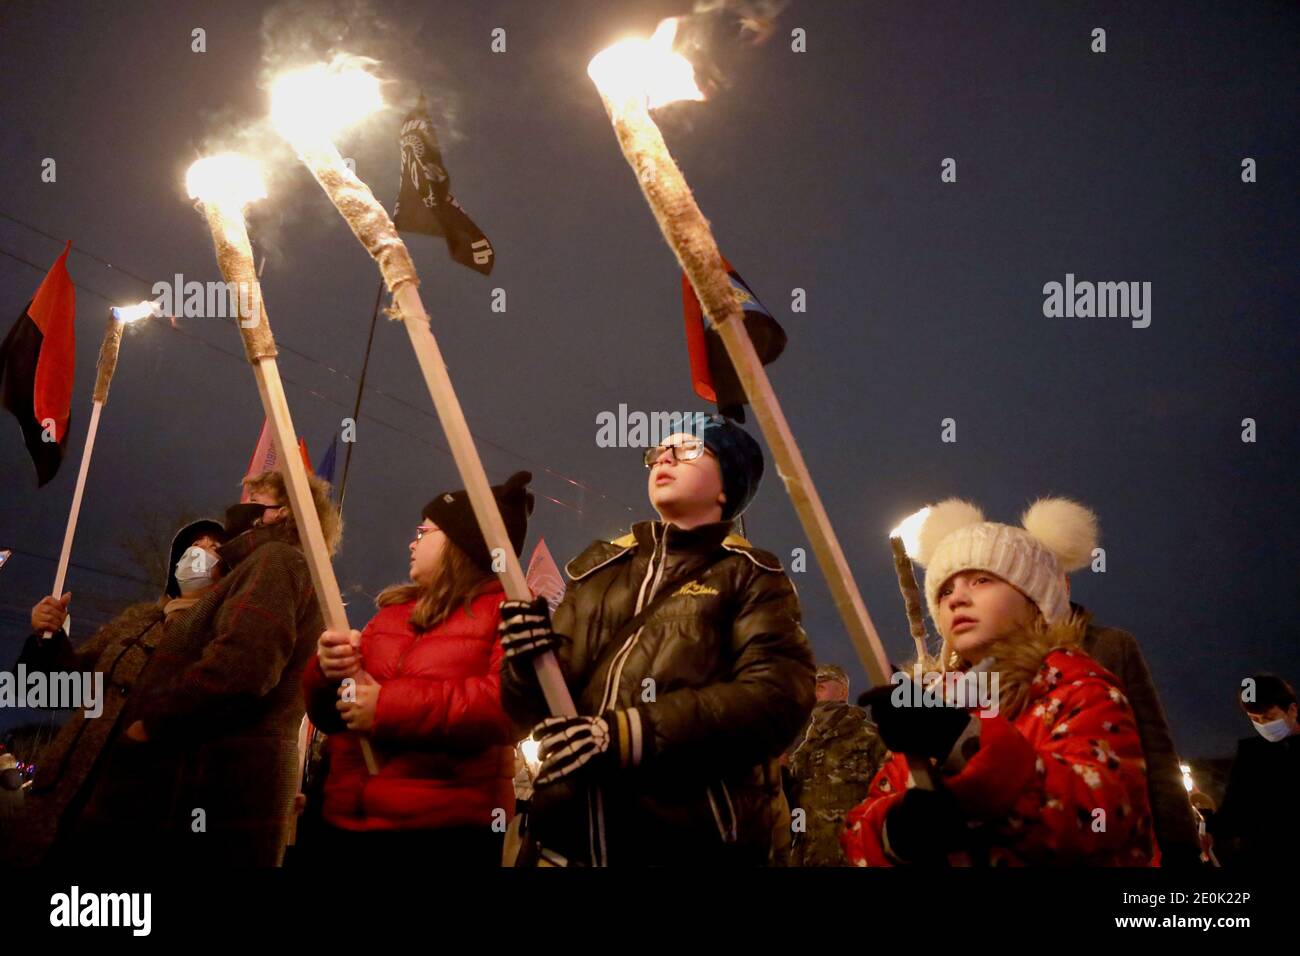 Non Exclusive: KYIV, UKRAINE - JANUARY 1, 2021 - Children hold the burning torches during the annual March of Honour, Dignity and Freedom on the 112th Stock Photo